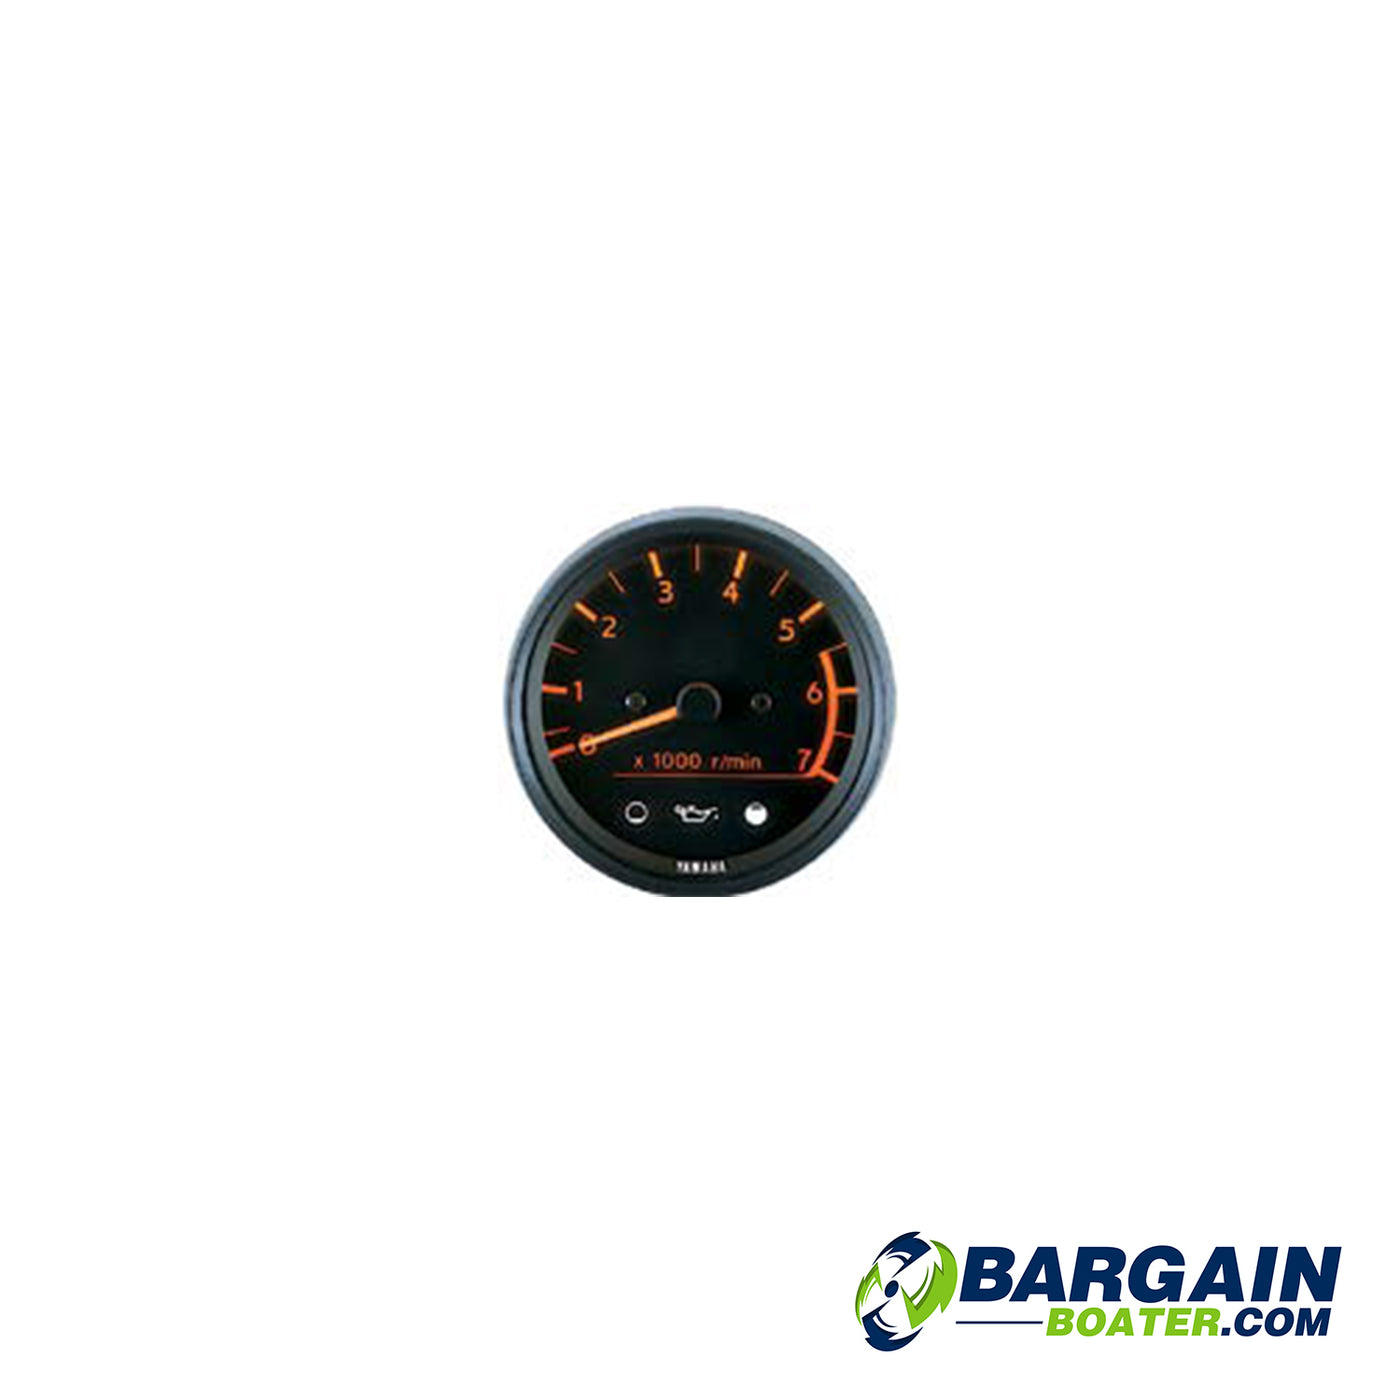 Yamaha Pro Series Tachometer with Two-Stroke Oil Indicators (6Y5-83540-05-00)